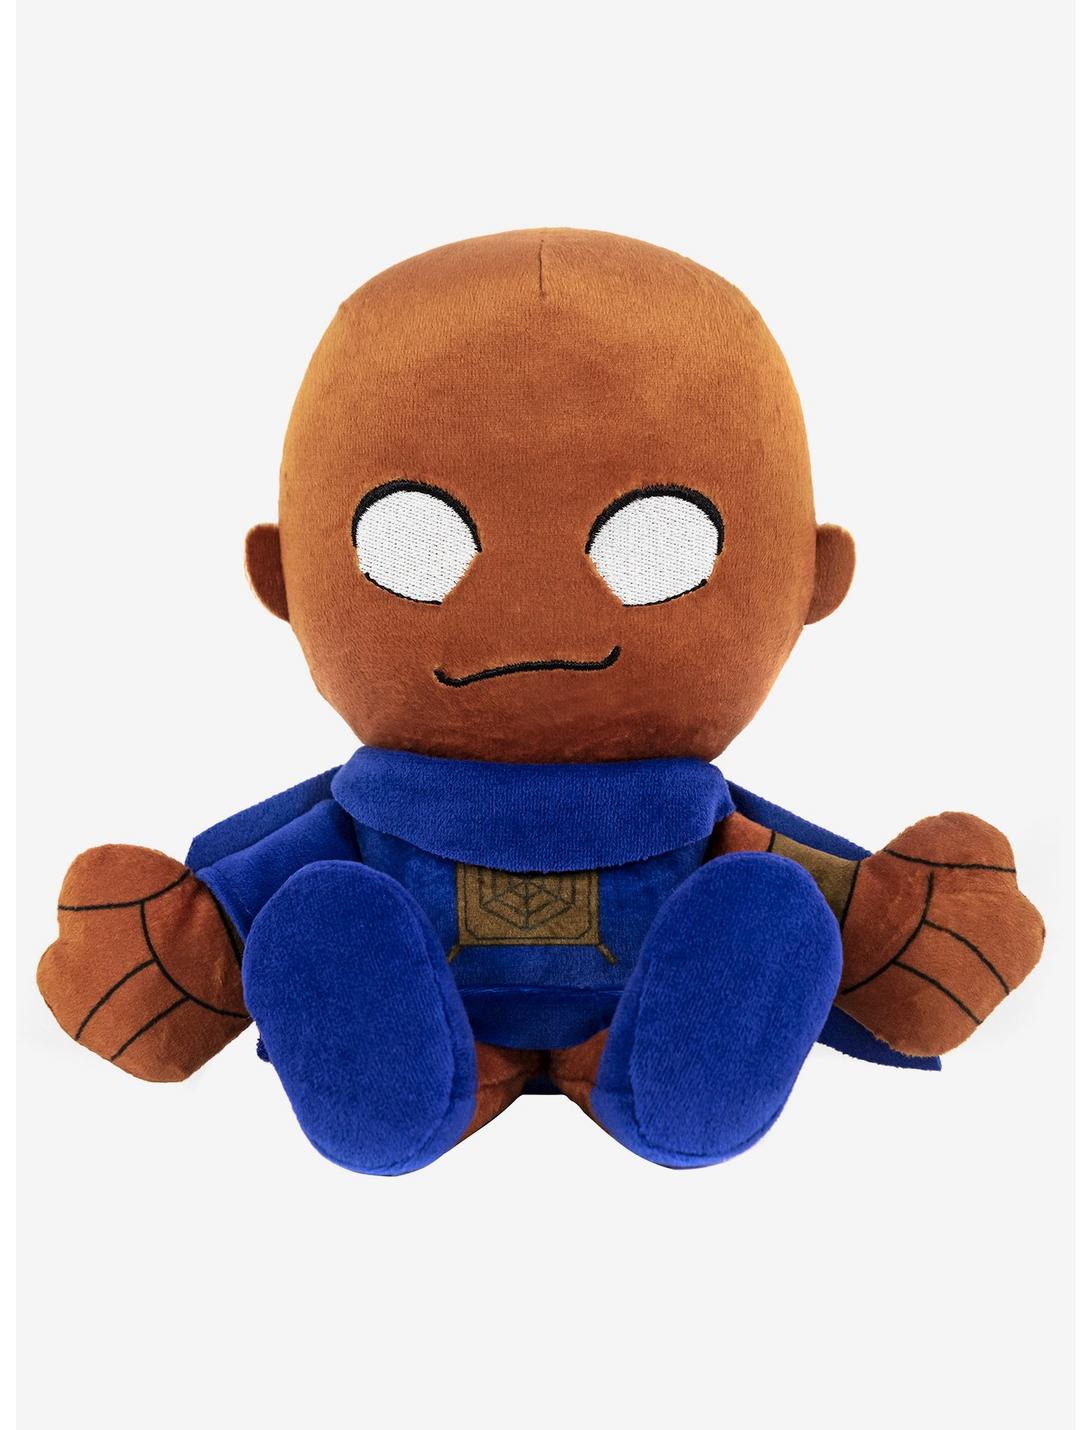 Marvel What If? The Watcher 8" Bleacher Creatures Plush Toy, , hi-res